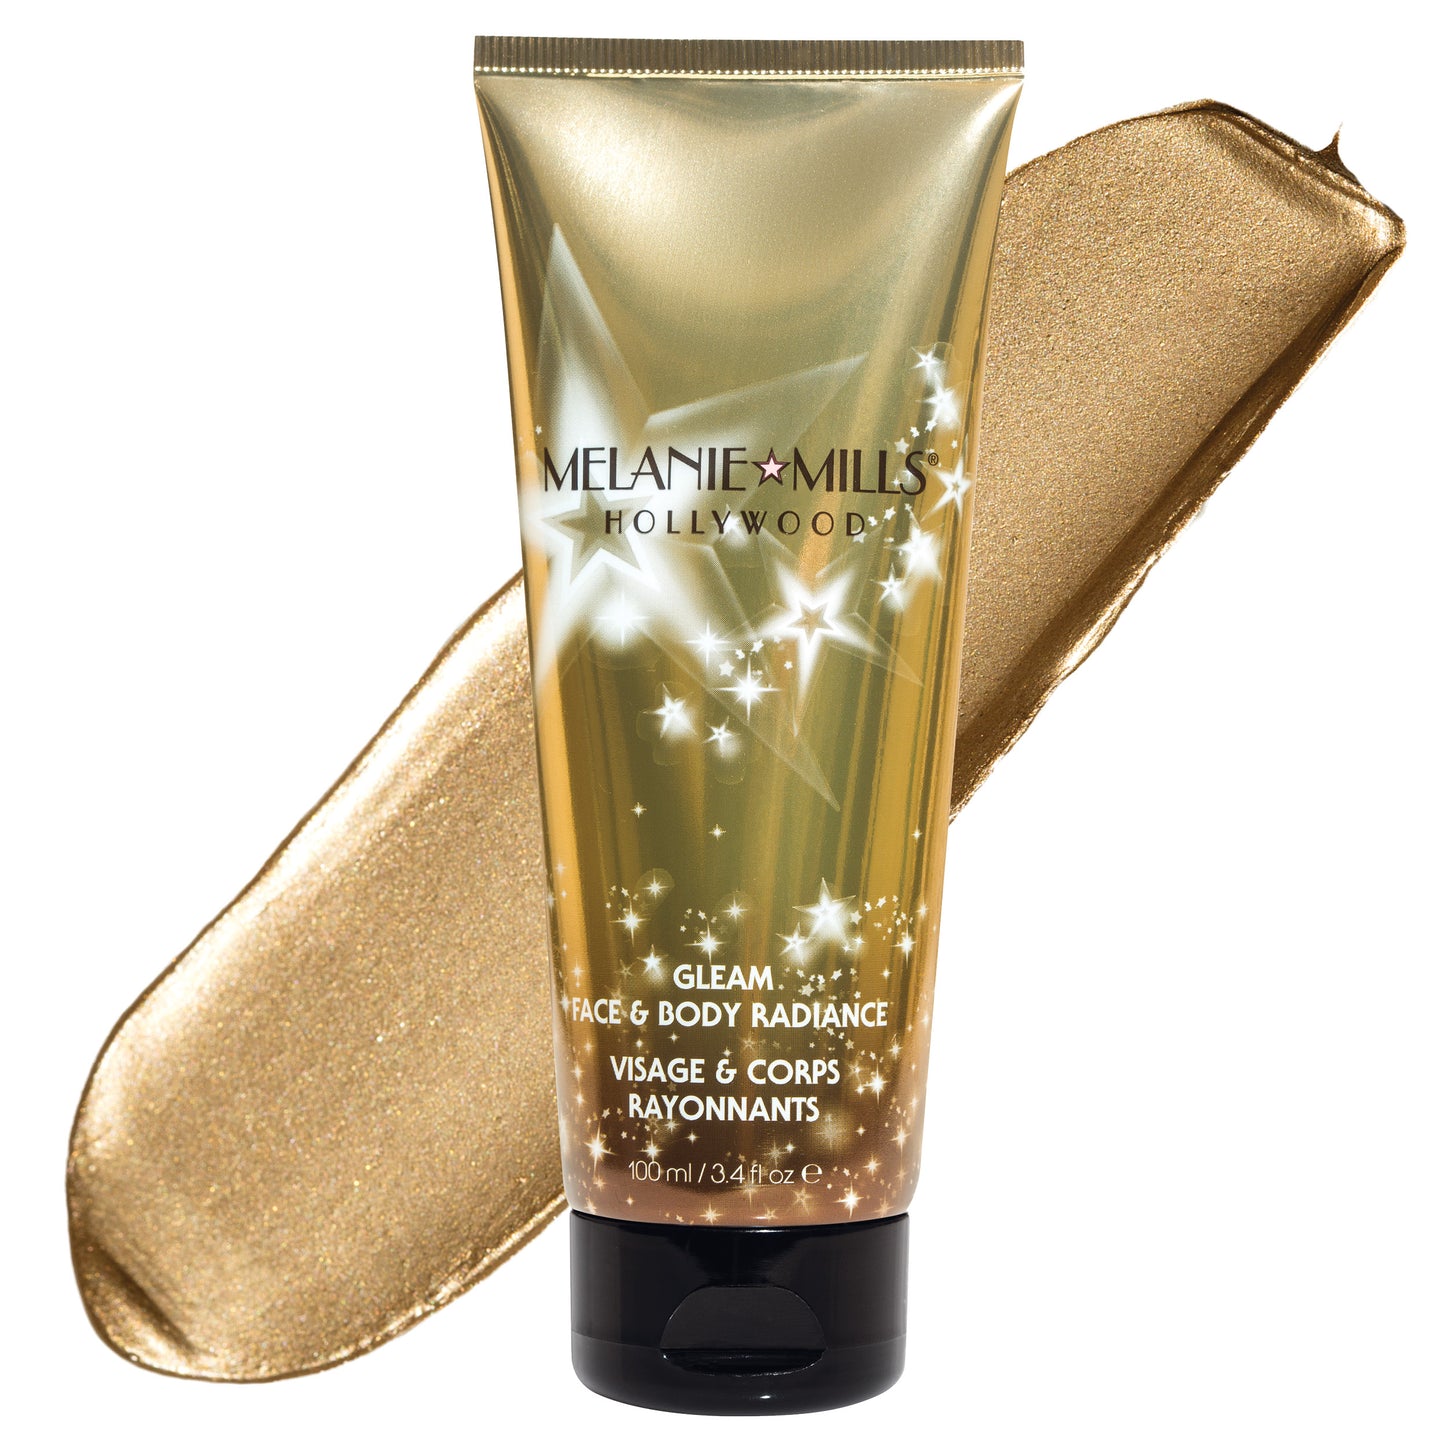 Melanie Mills Hollywood Gleam Body Radiance All In One Makeup, Moisturiser & Glow For Face & Body Disco Gold